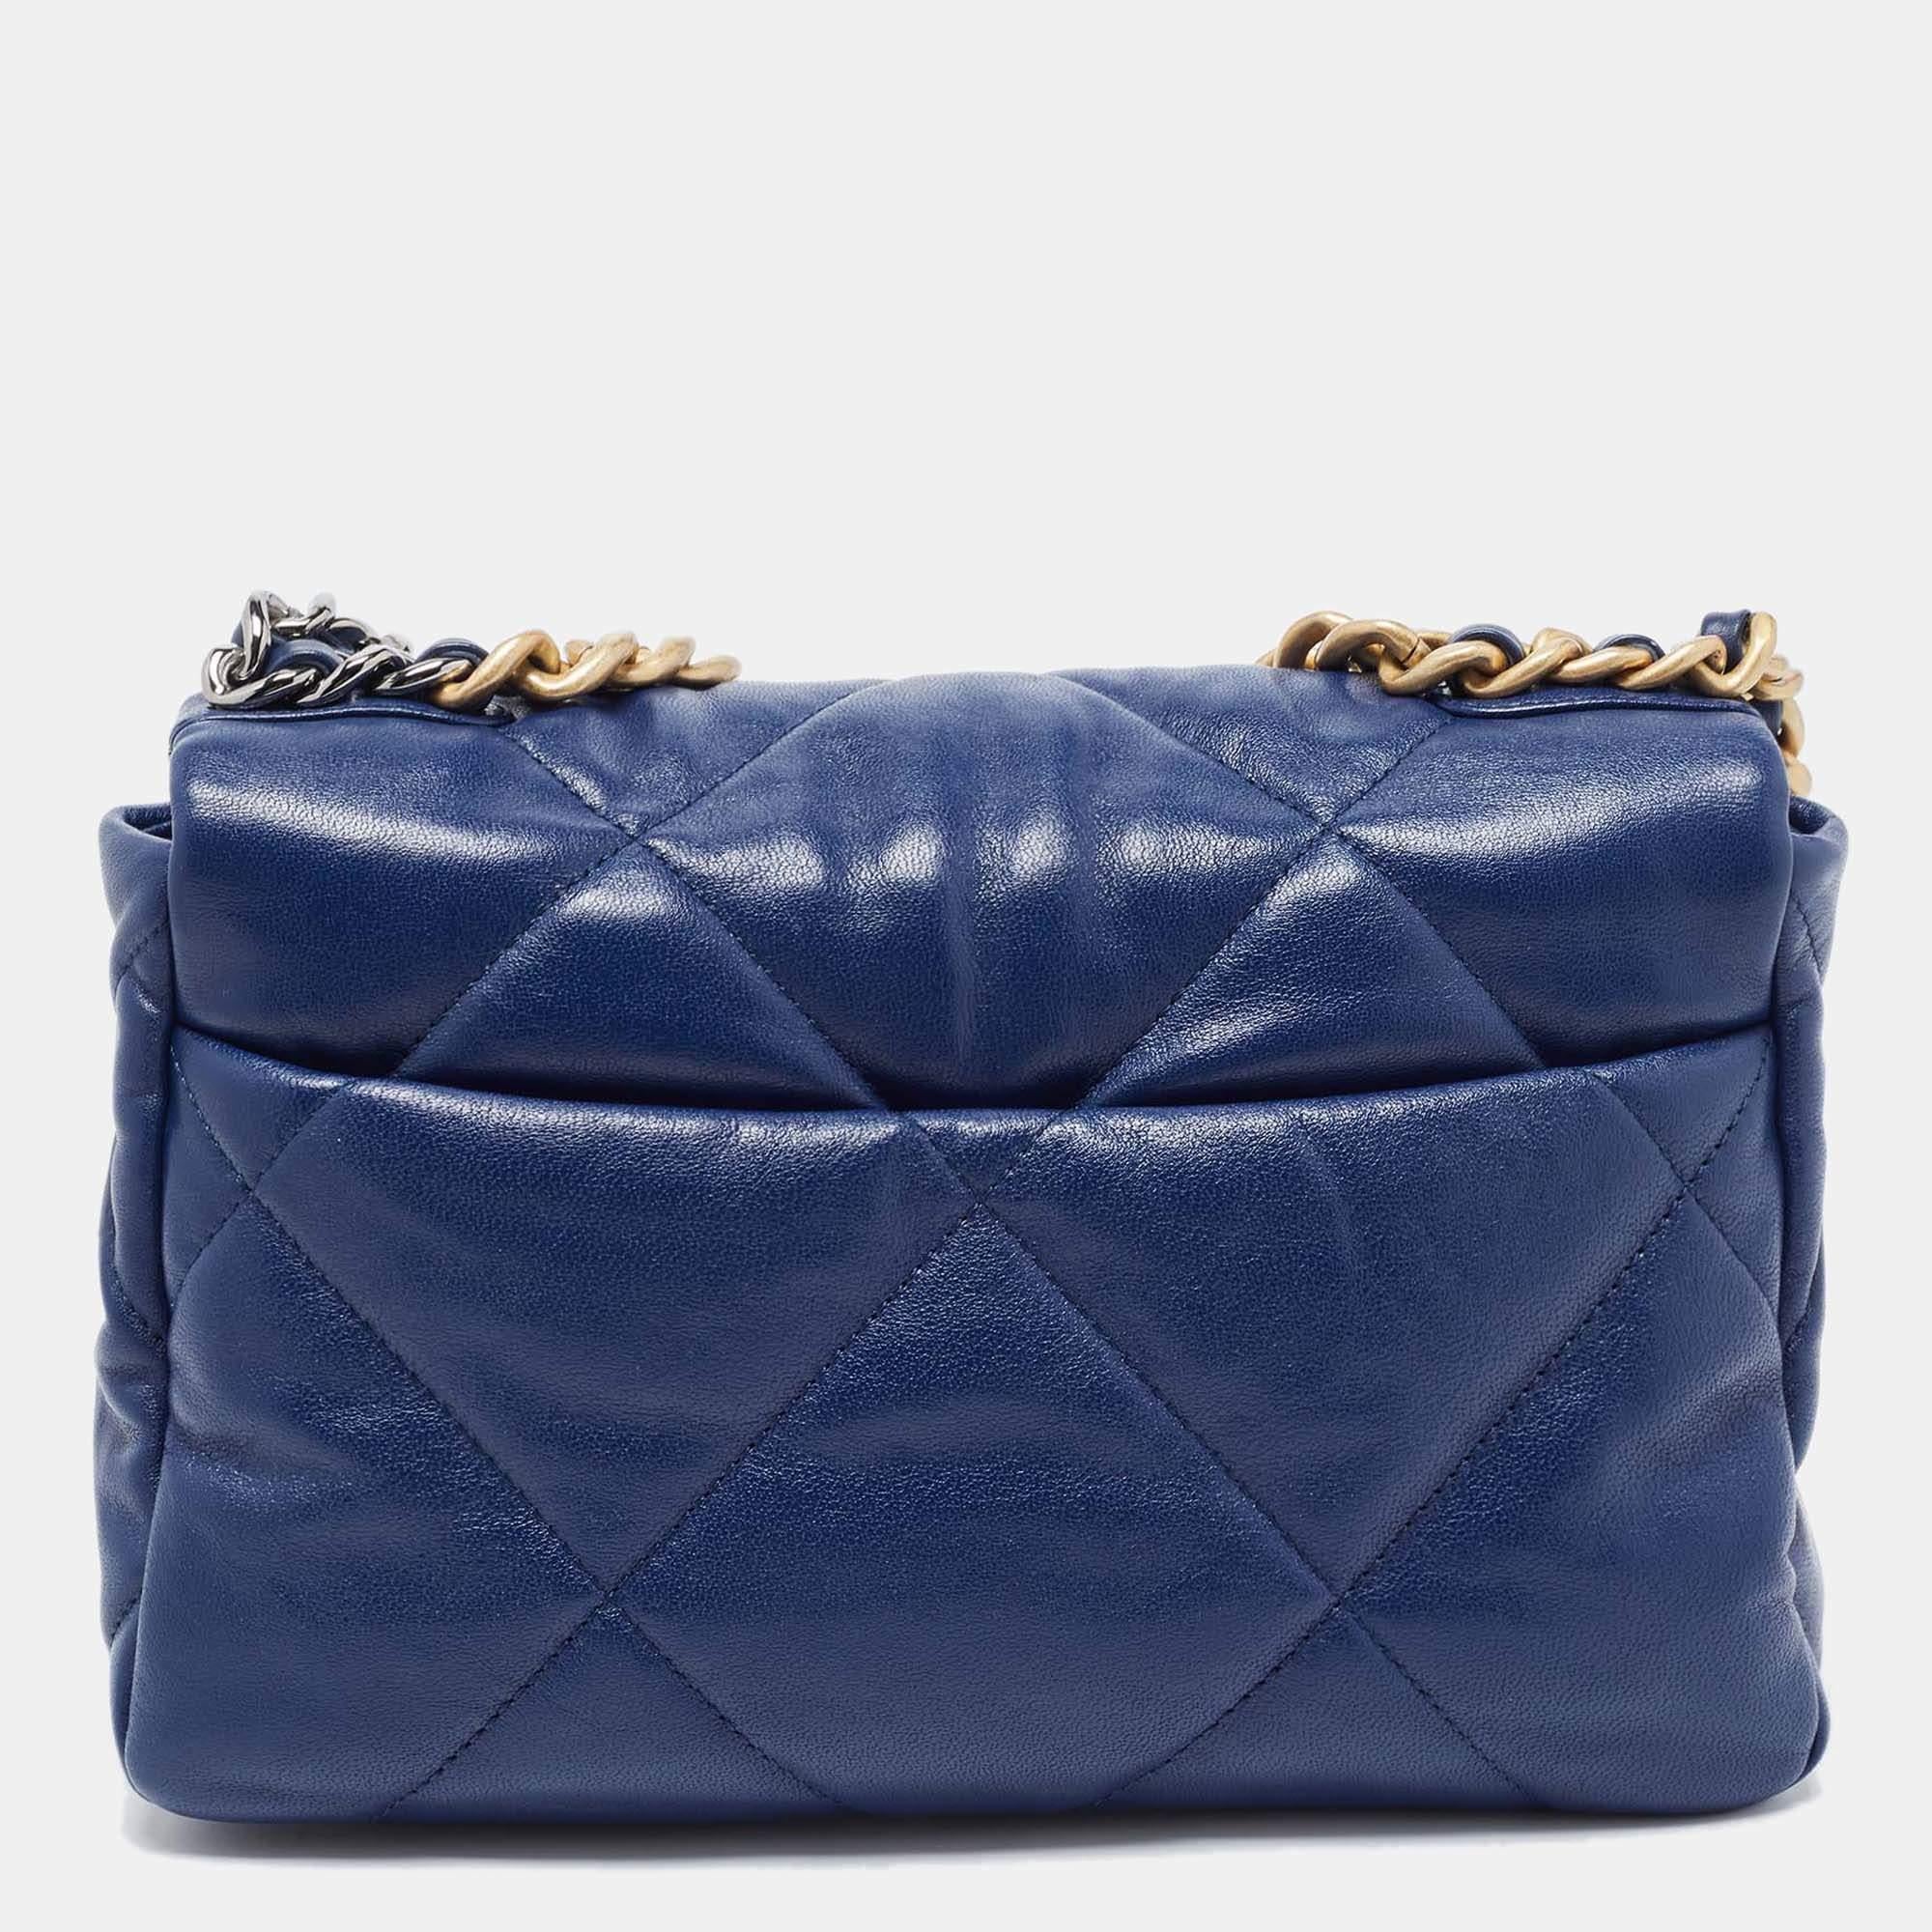 Chanel Blue Quilted Leather Medium 19 Flap Bag For Sale 6